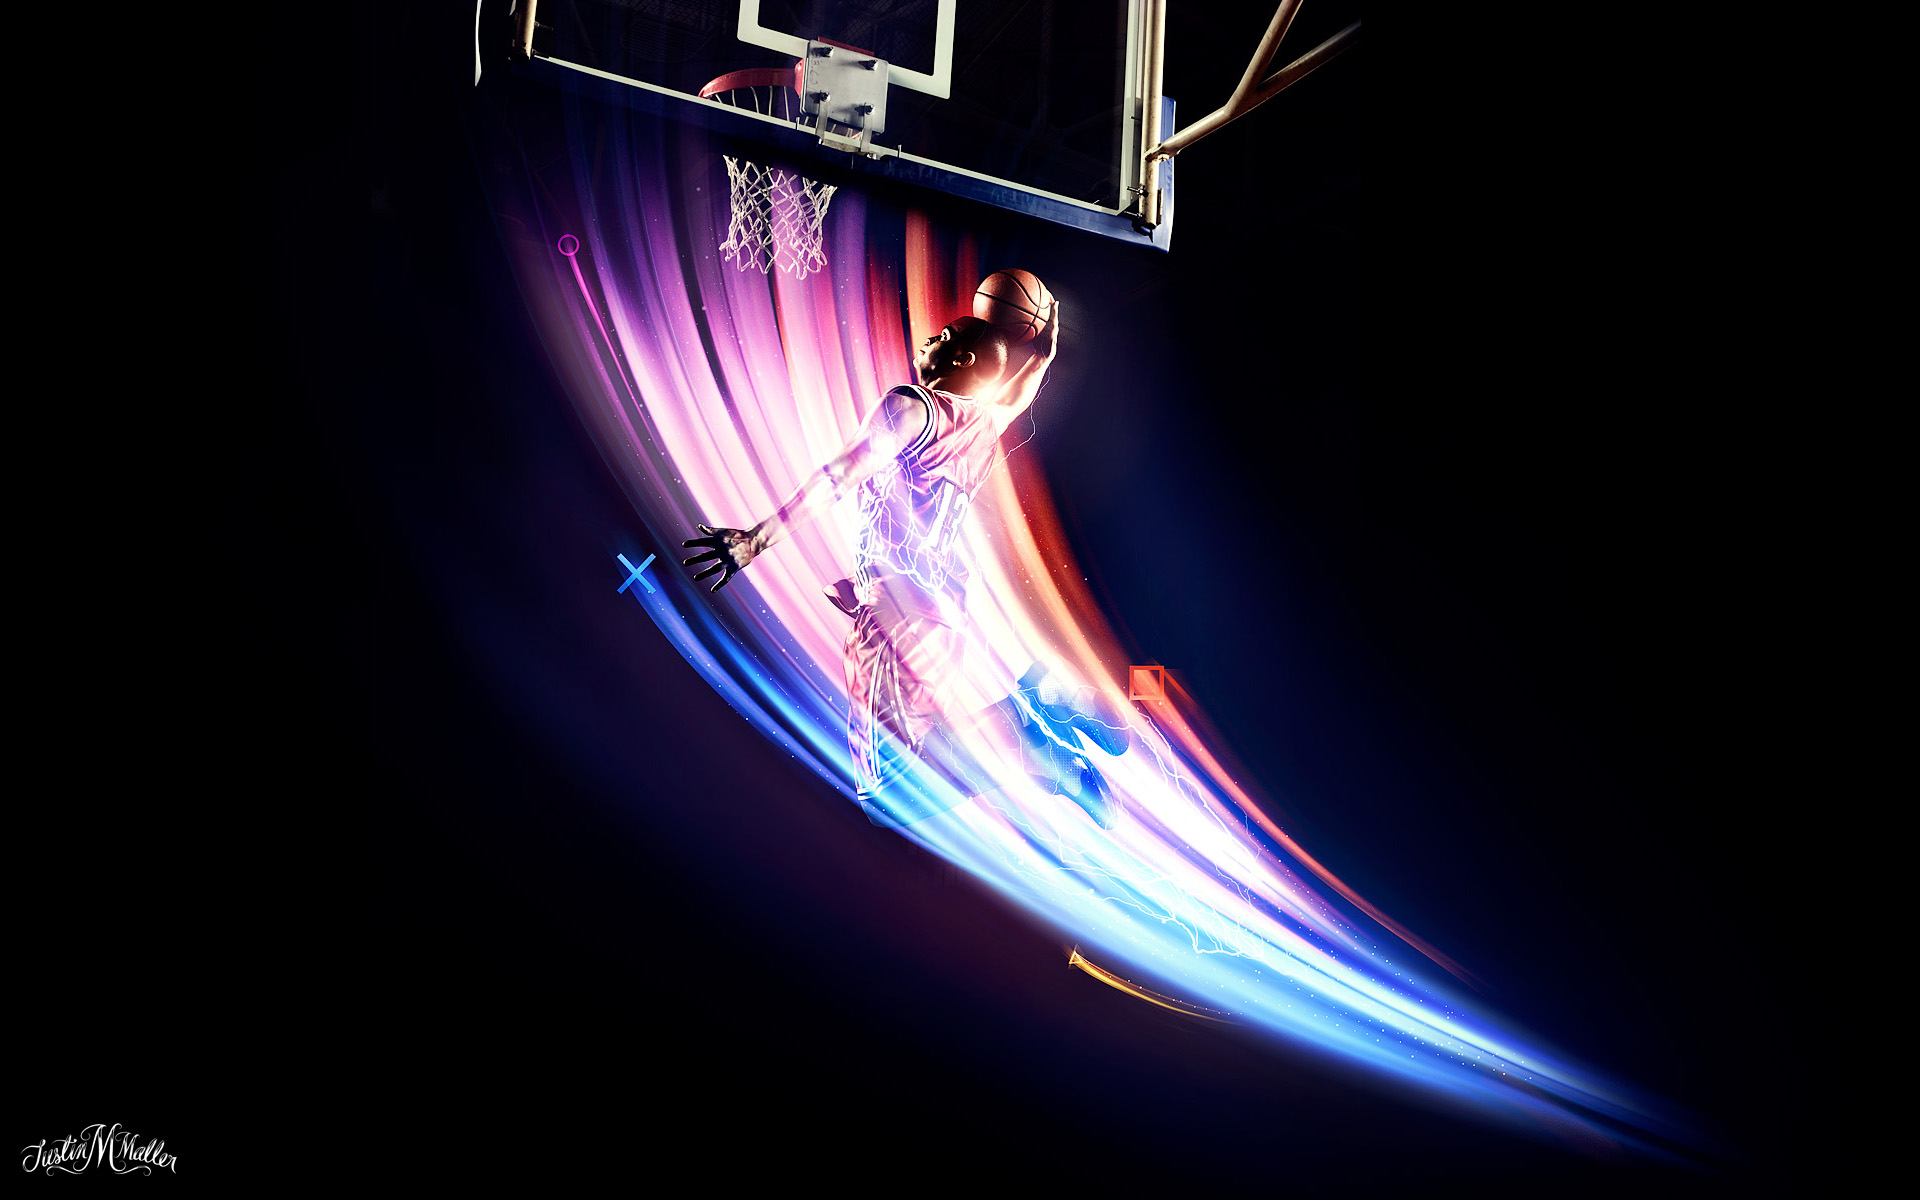 Basketball 4K wallpaper for your desktop or mobile screen free and easy to download